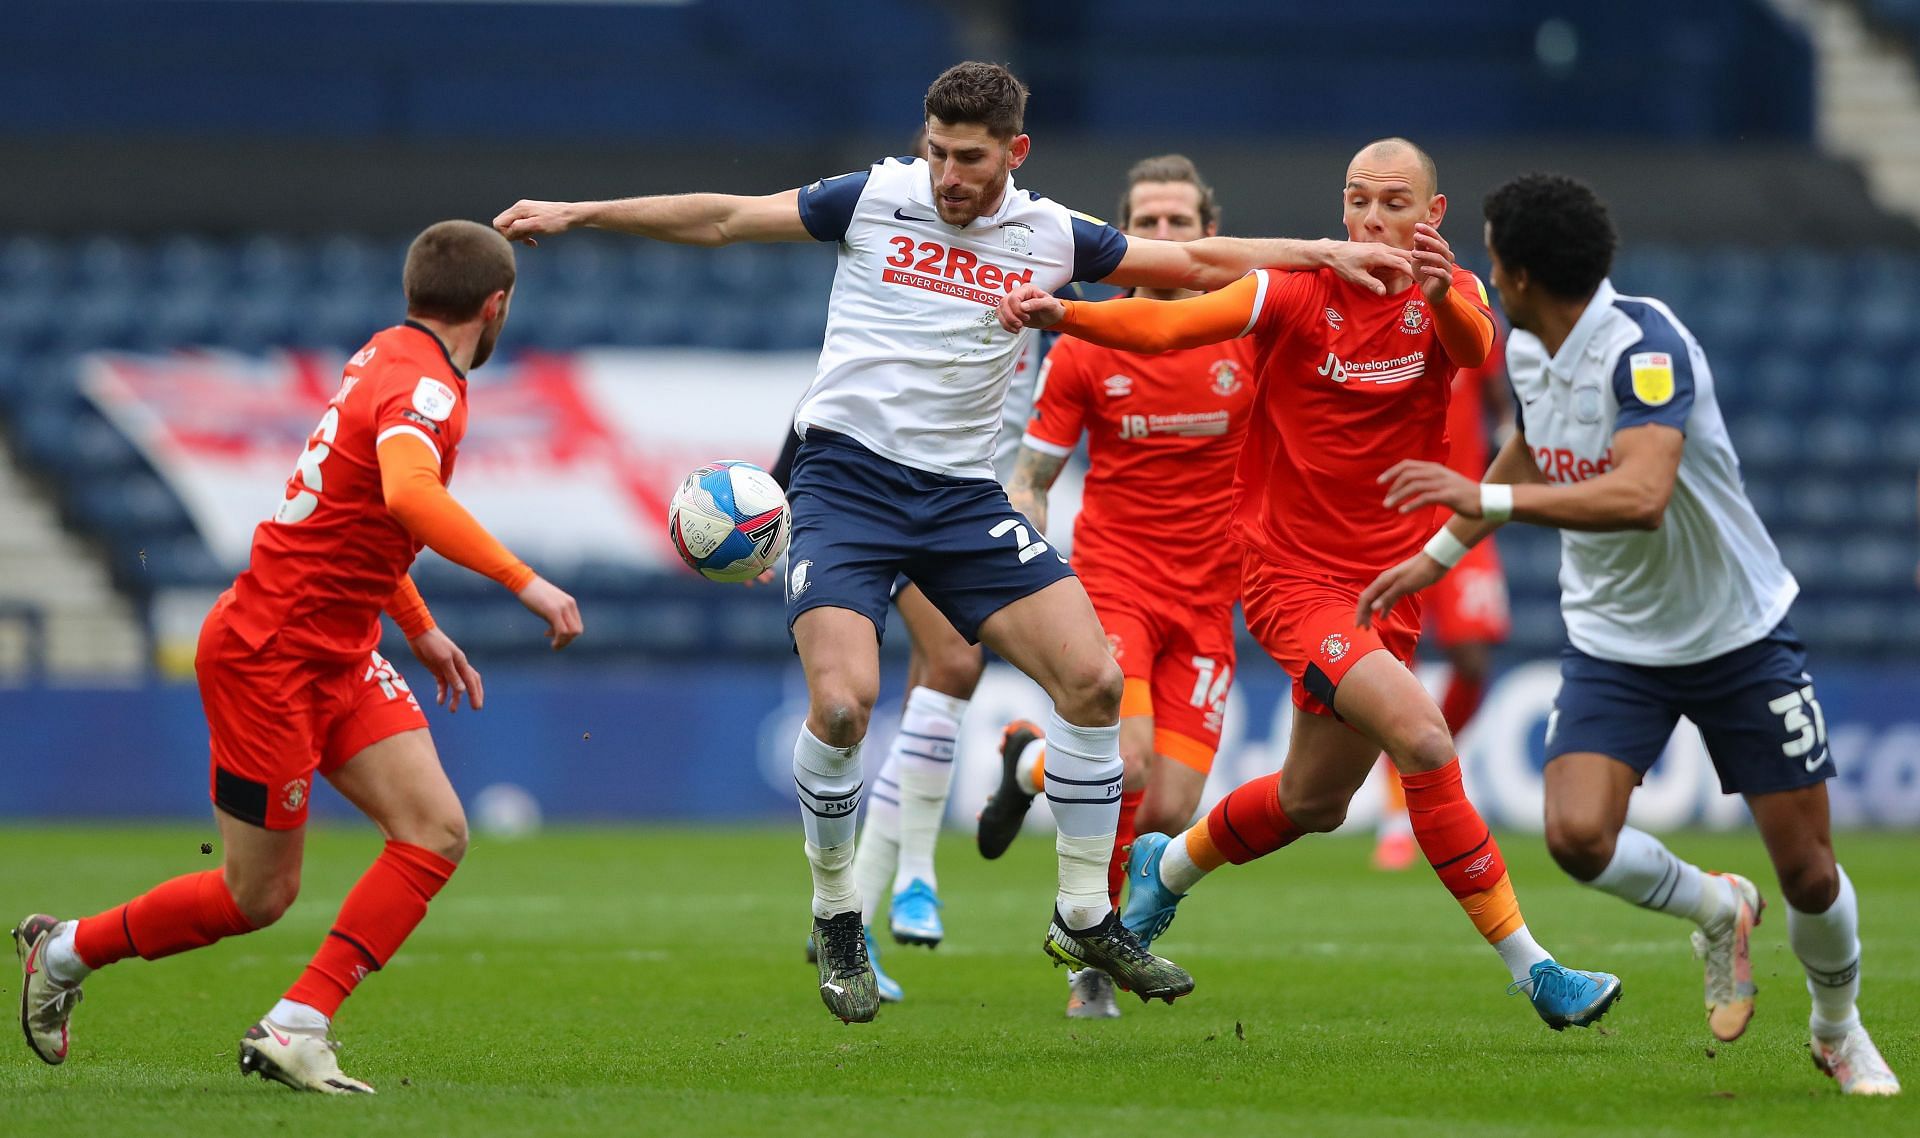 Luton Town and Preston North End square off on Wednesday